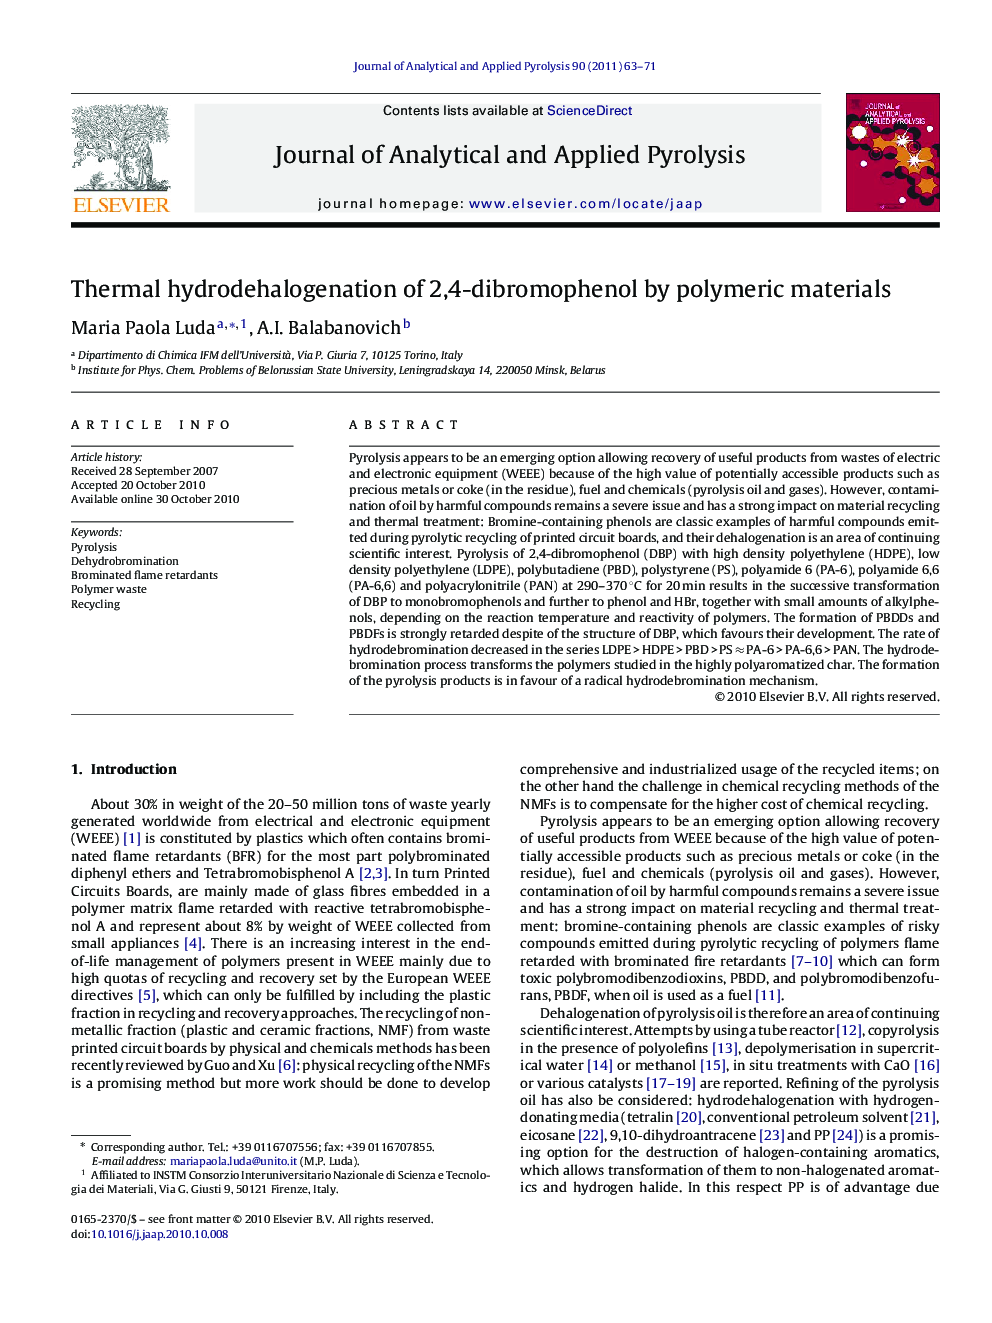 Thermal hydrodehalogenation of 2,4-dibromophenol by polymeric materials